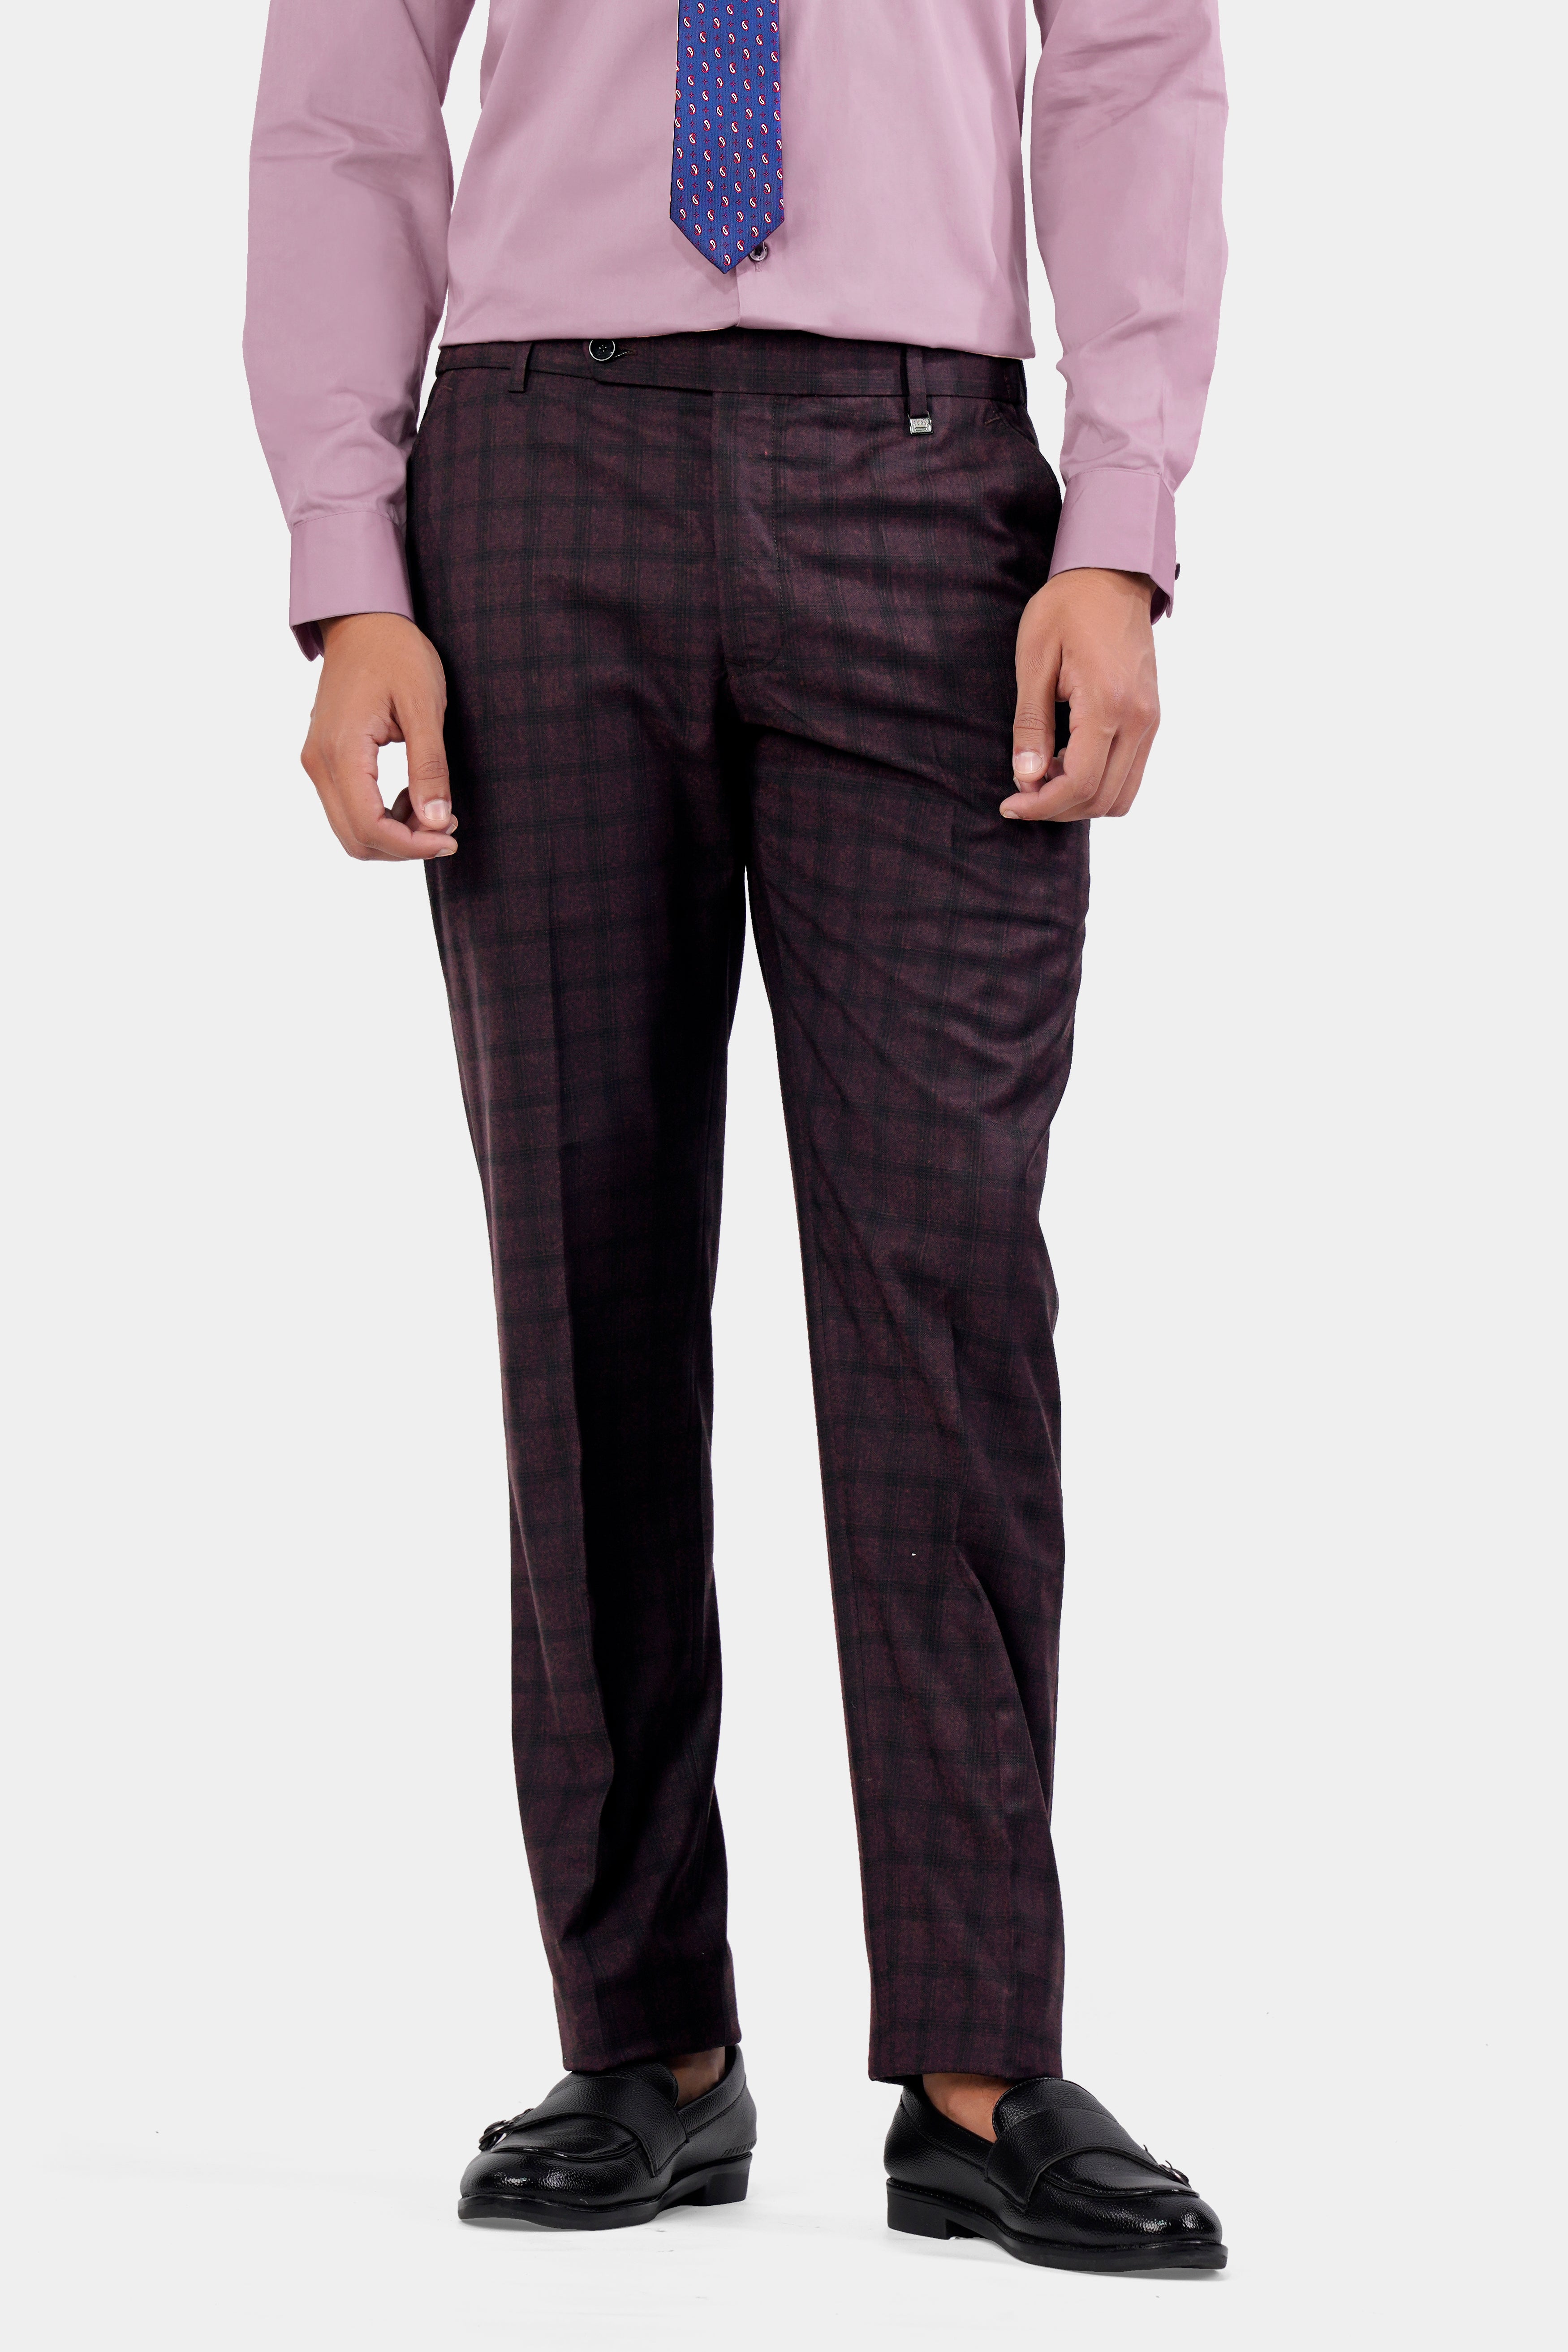 Cinder Purple Checkered Wool Rich Pant T2916-SW-28, T2916-SW-30, T2916-SW-32, T2916-SW-34, T2916-SW-36, T2916-SW-38, T2916-SW-40, T2916-SW-42, T2916-SW-44